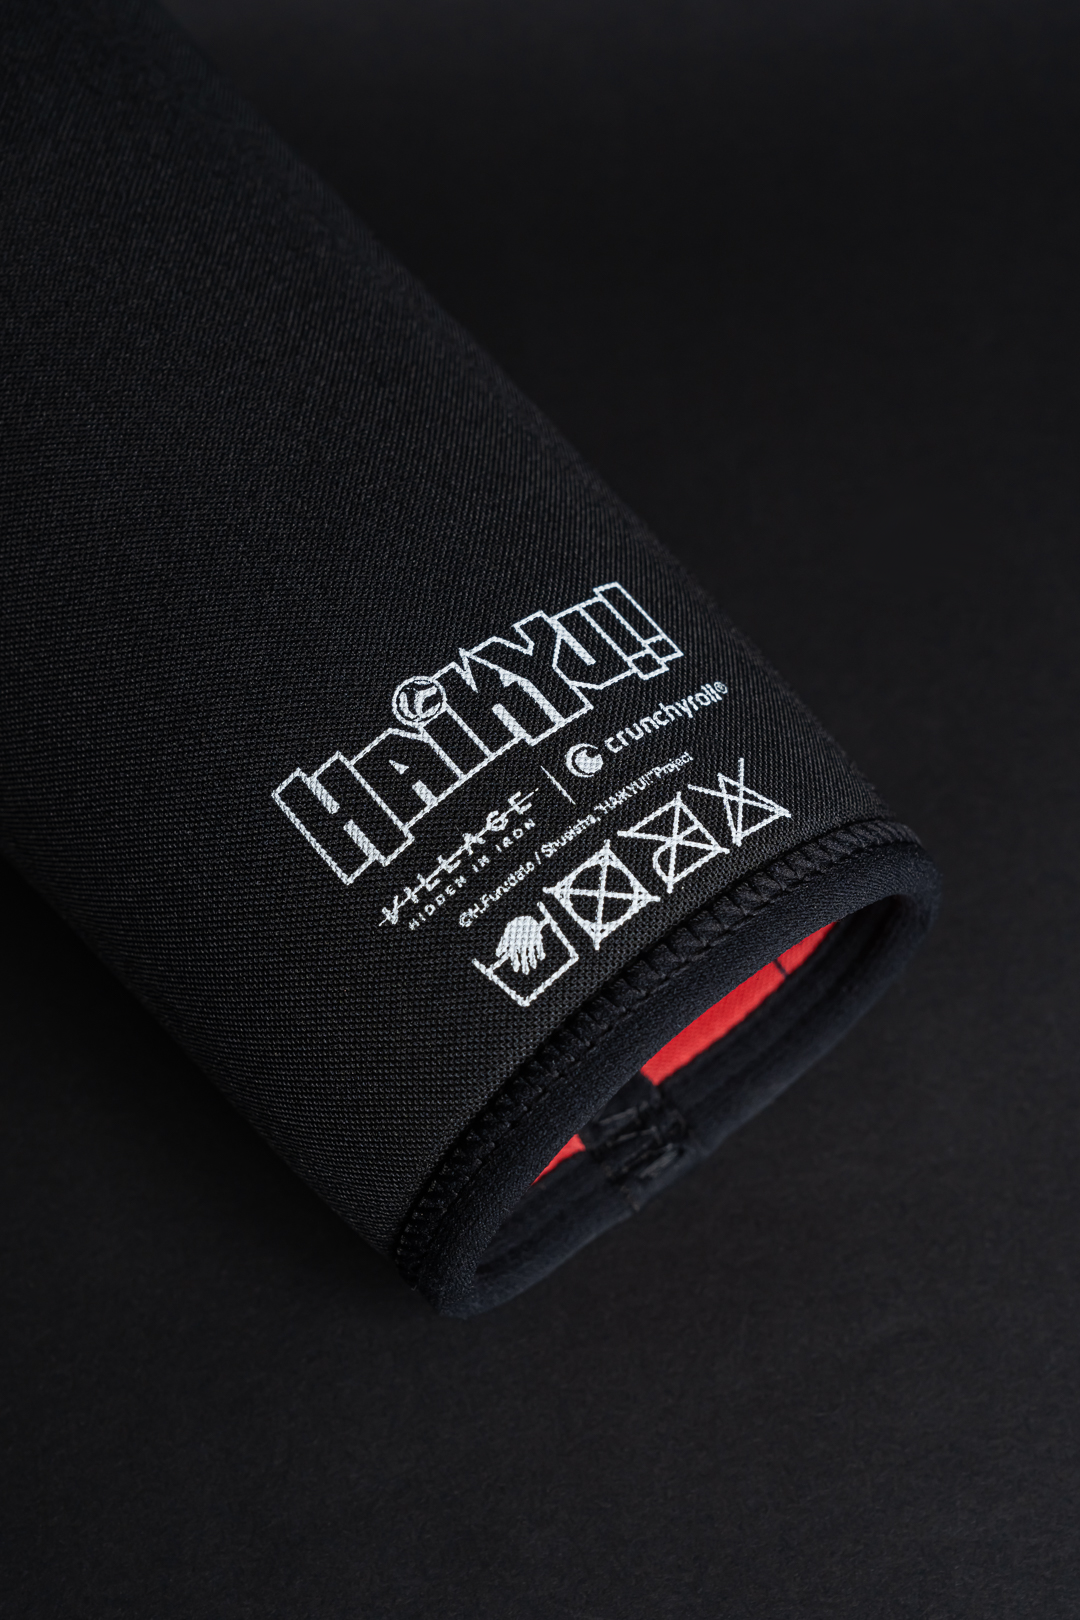 NEKOMA Knee Sleeves (shipping by mid-August)